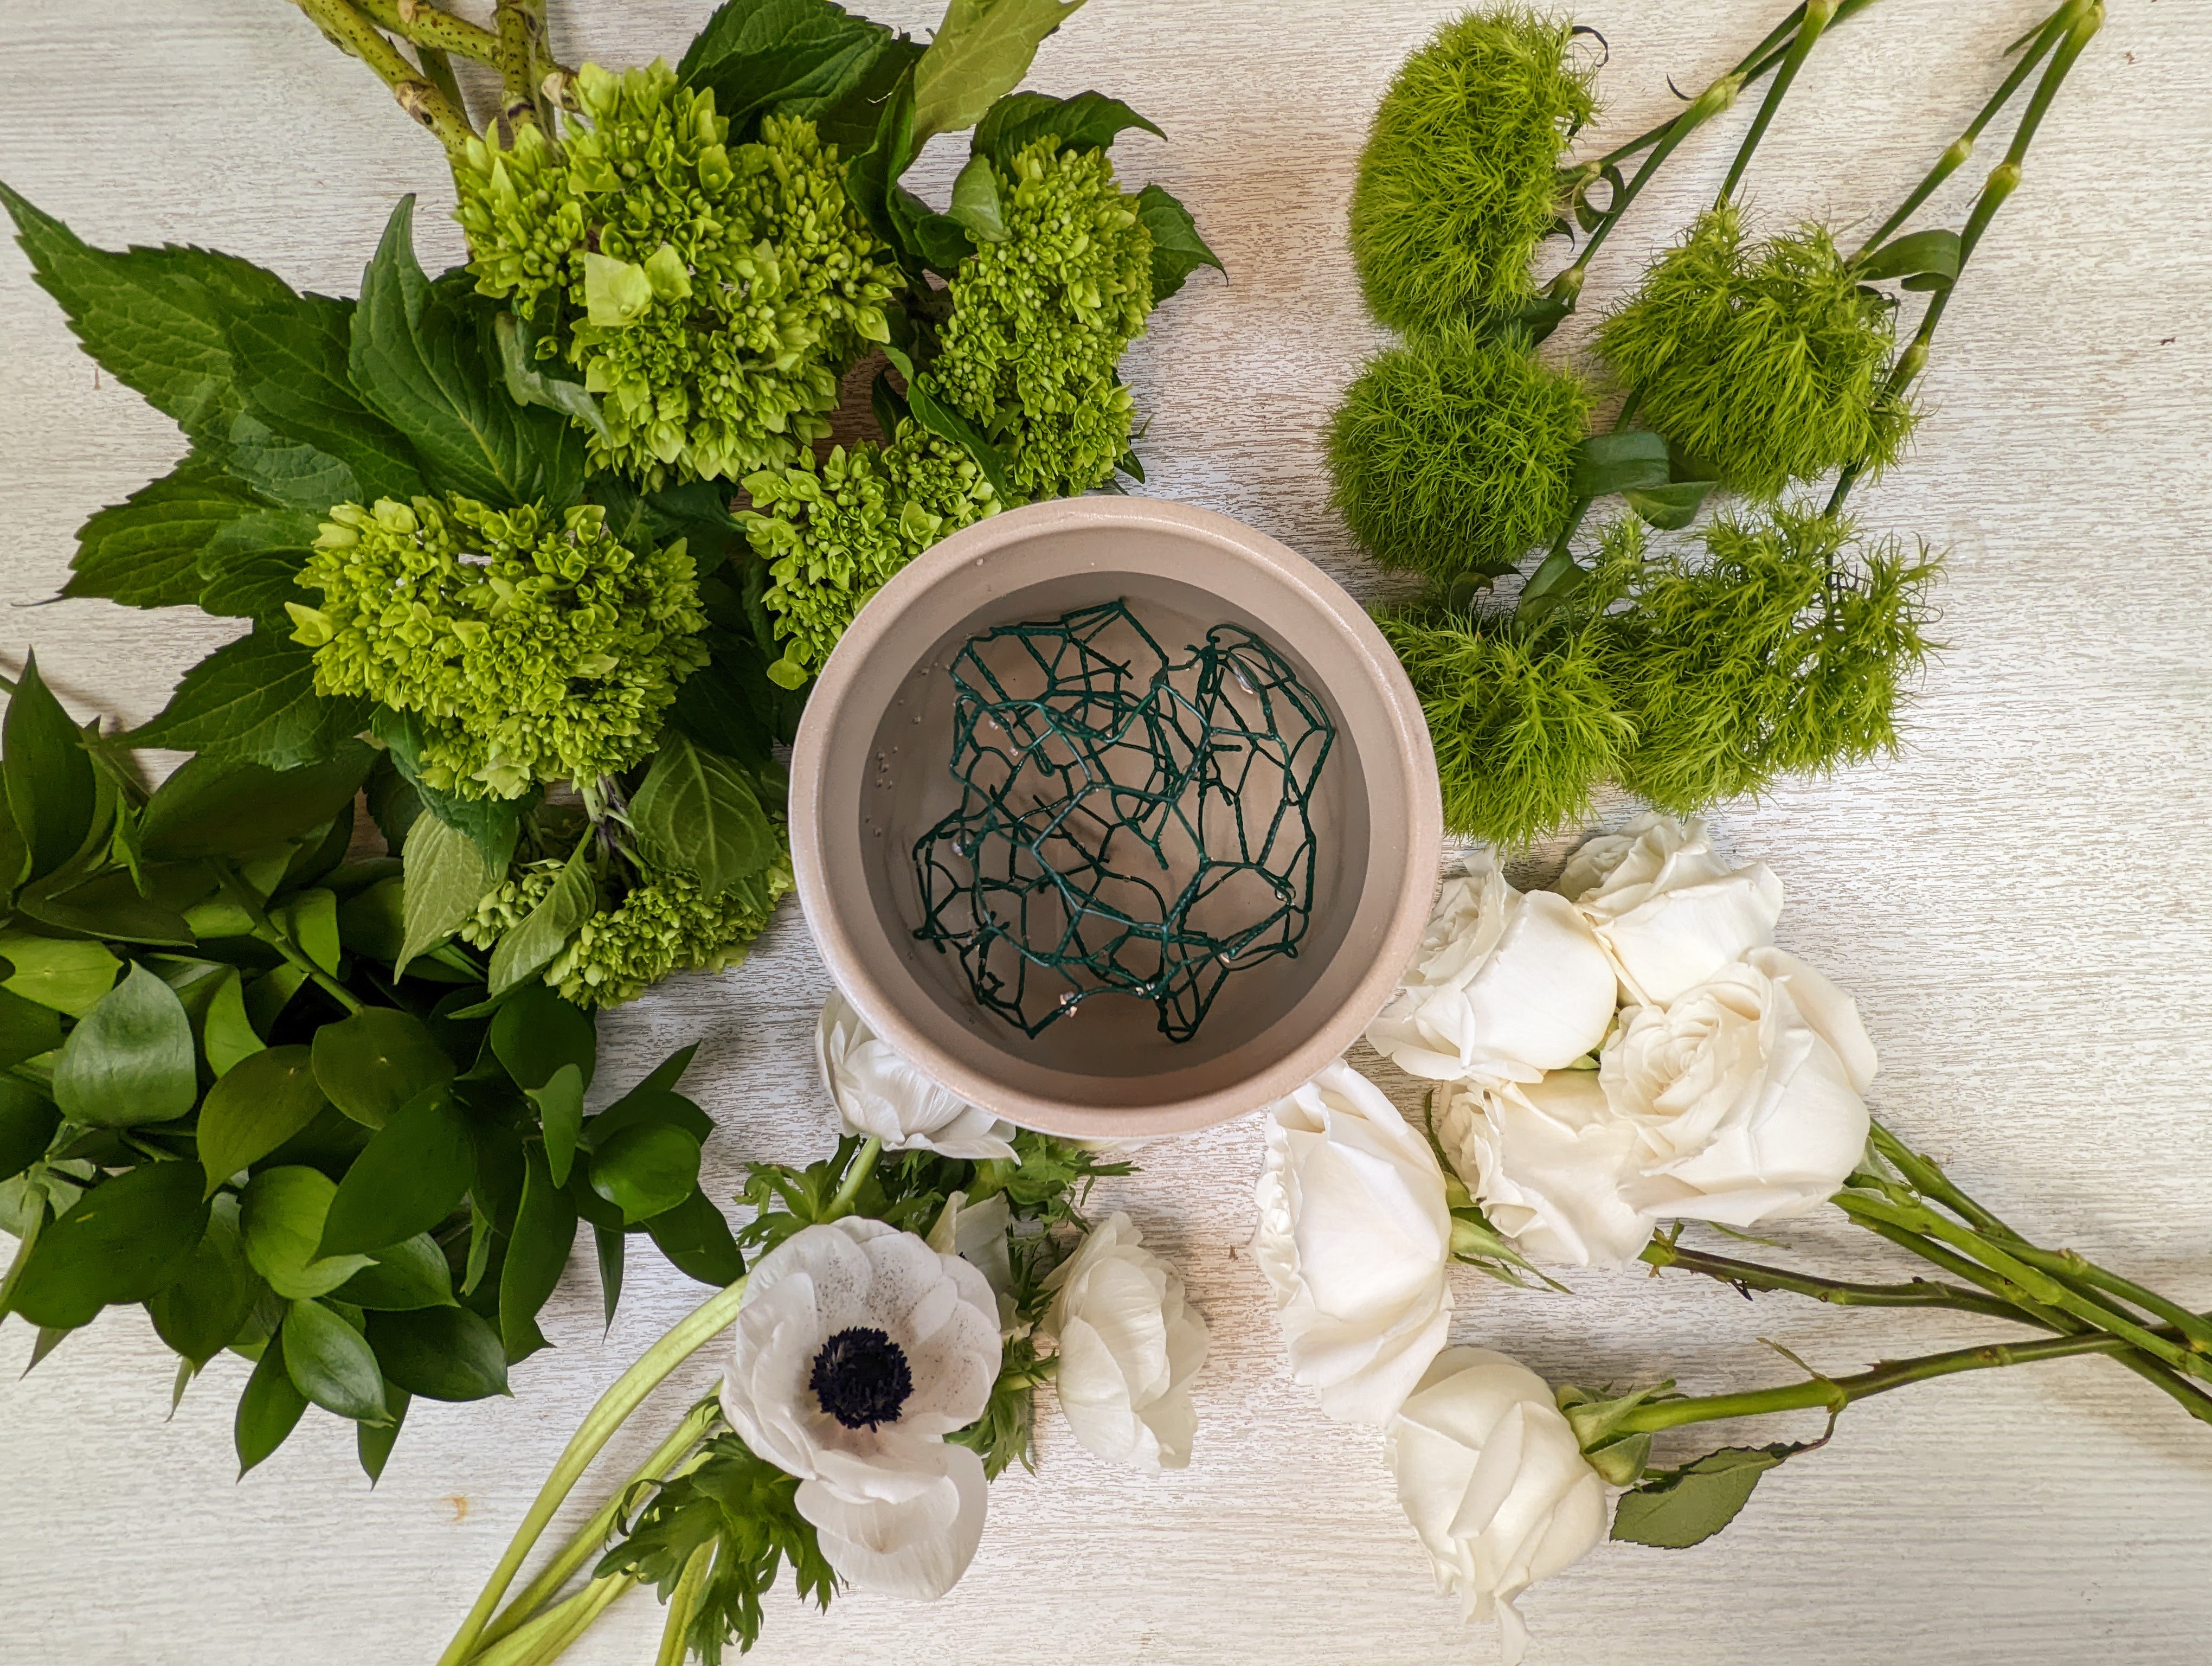 Green Texture flowers, white roses and a bowl with chicken wire in it